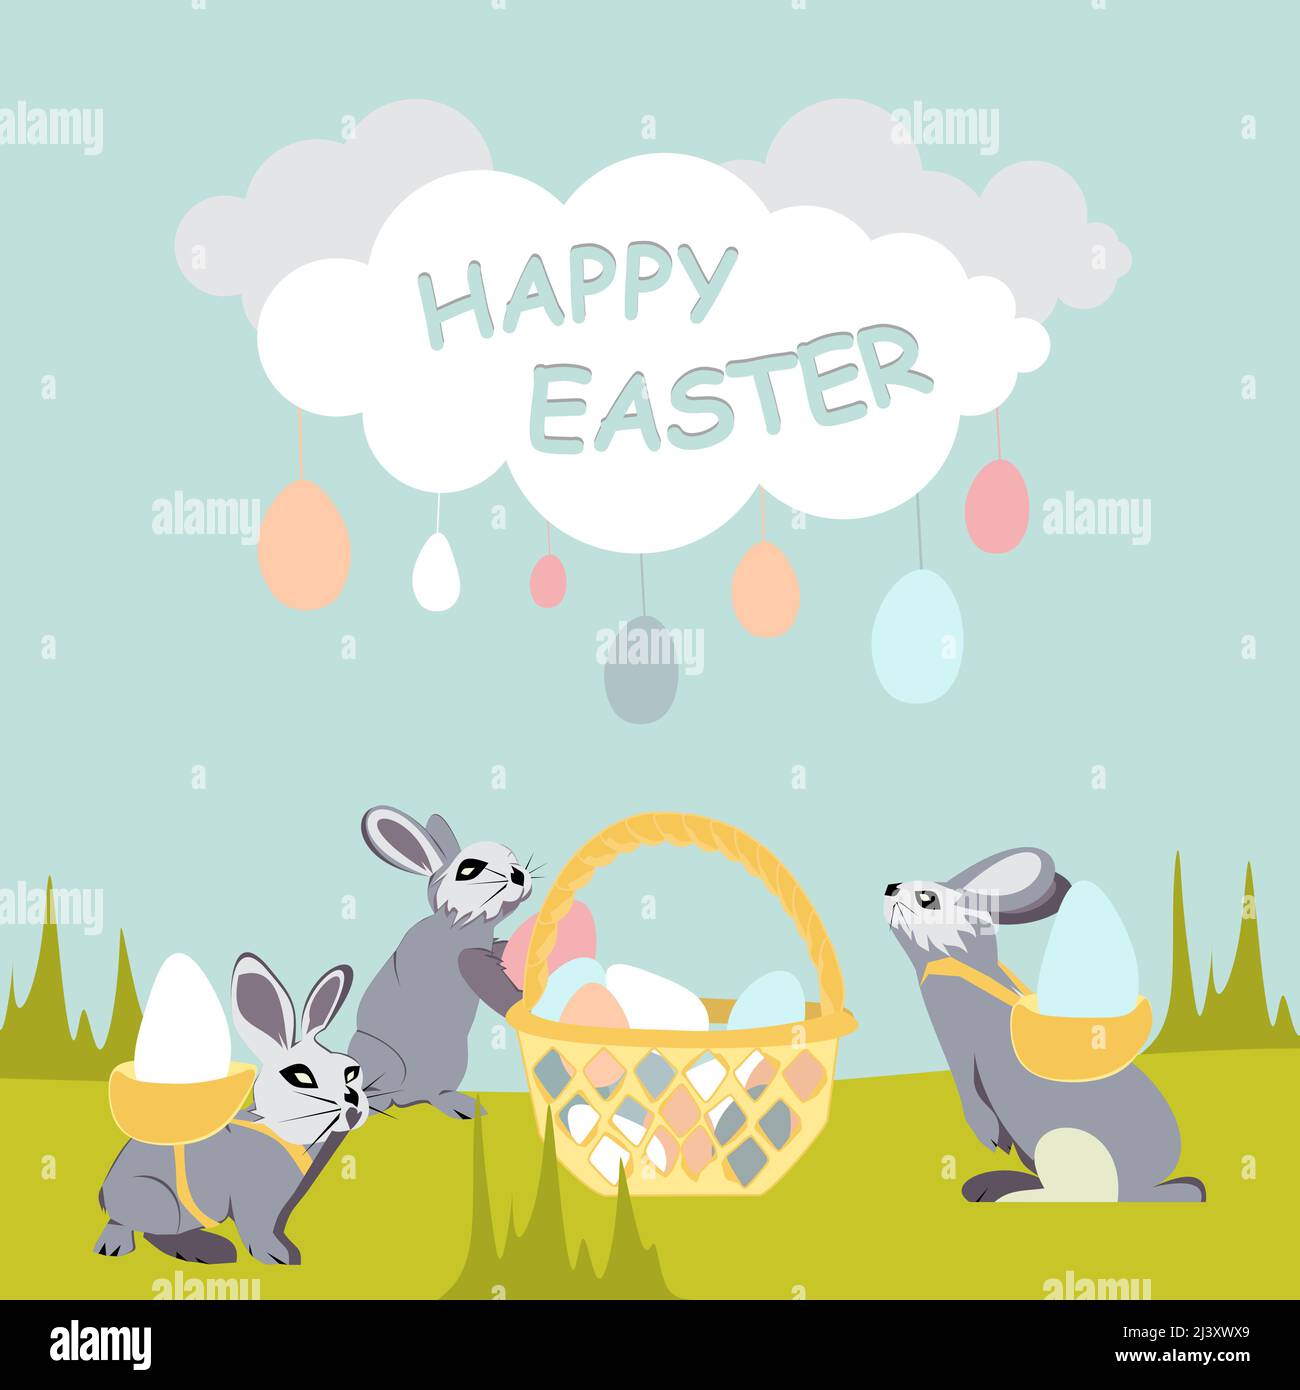 Easter bunnies stack Easter eggs in a wicker basket. Above the rabbits is a cloud from which drops of spring rain fall in the form of Easter eggs with Stock Vector